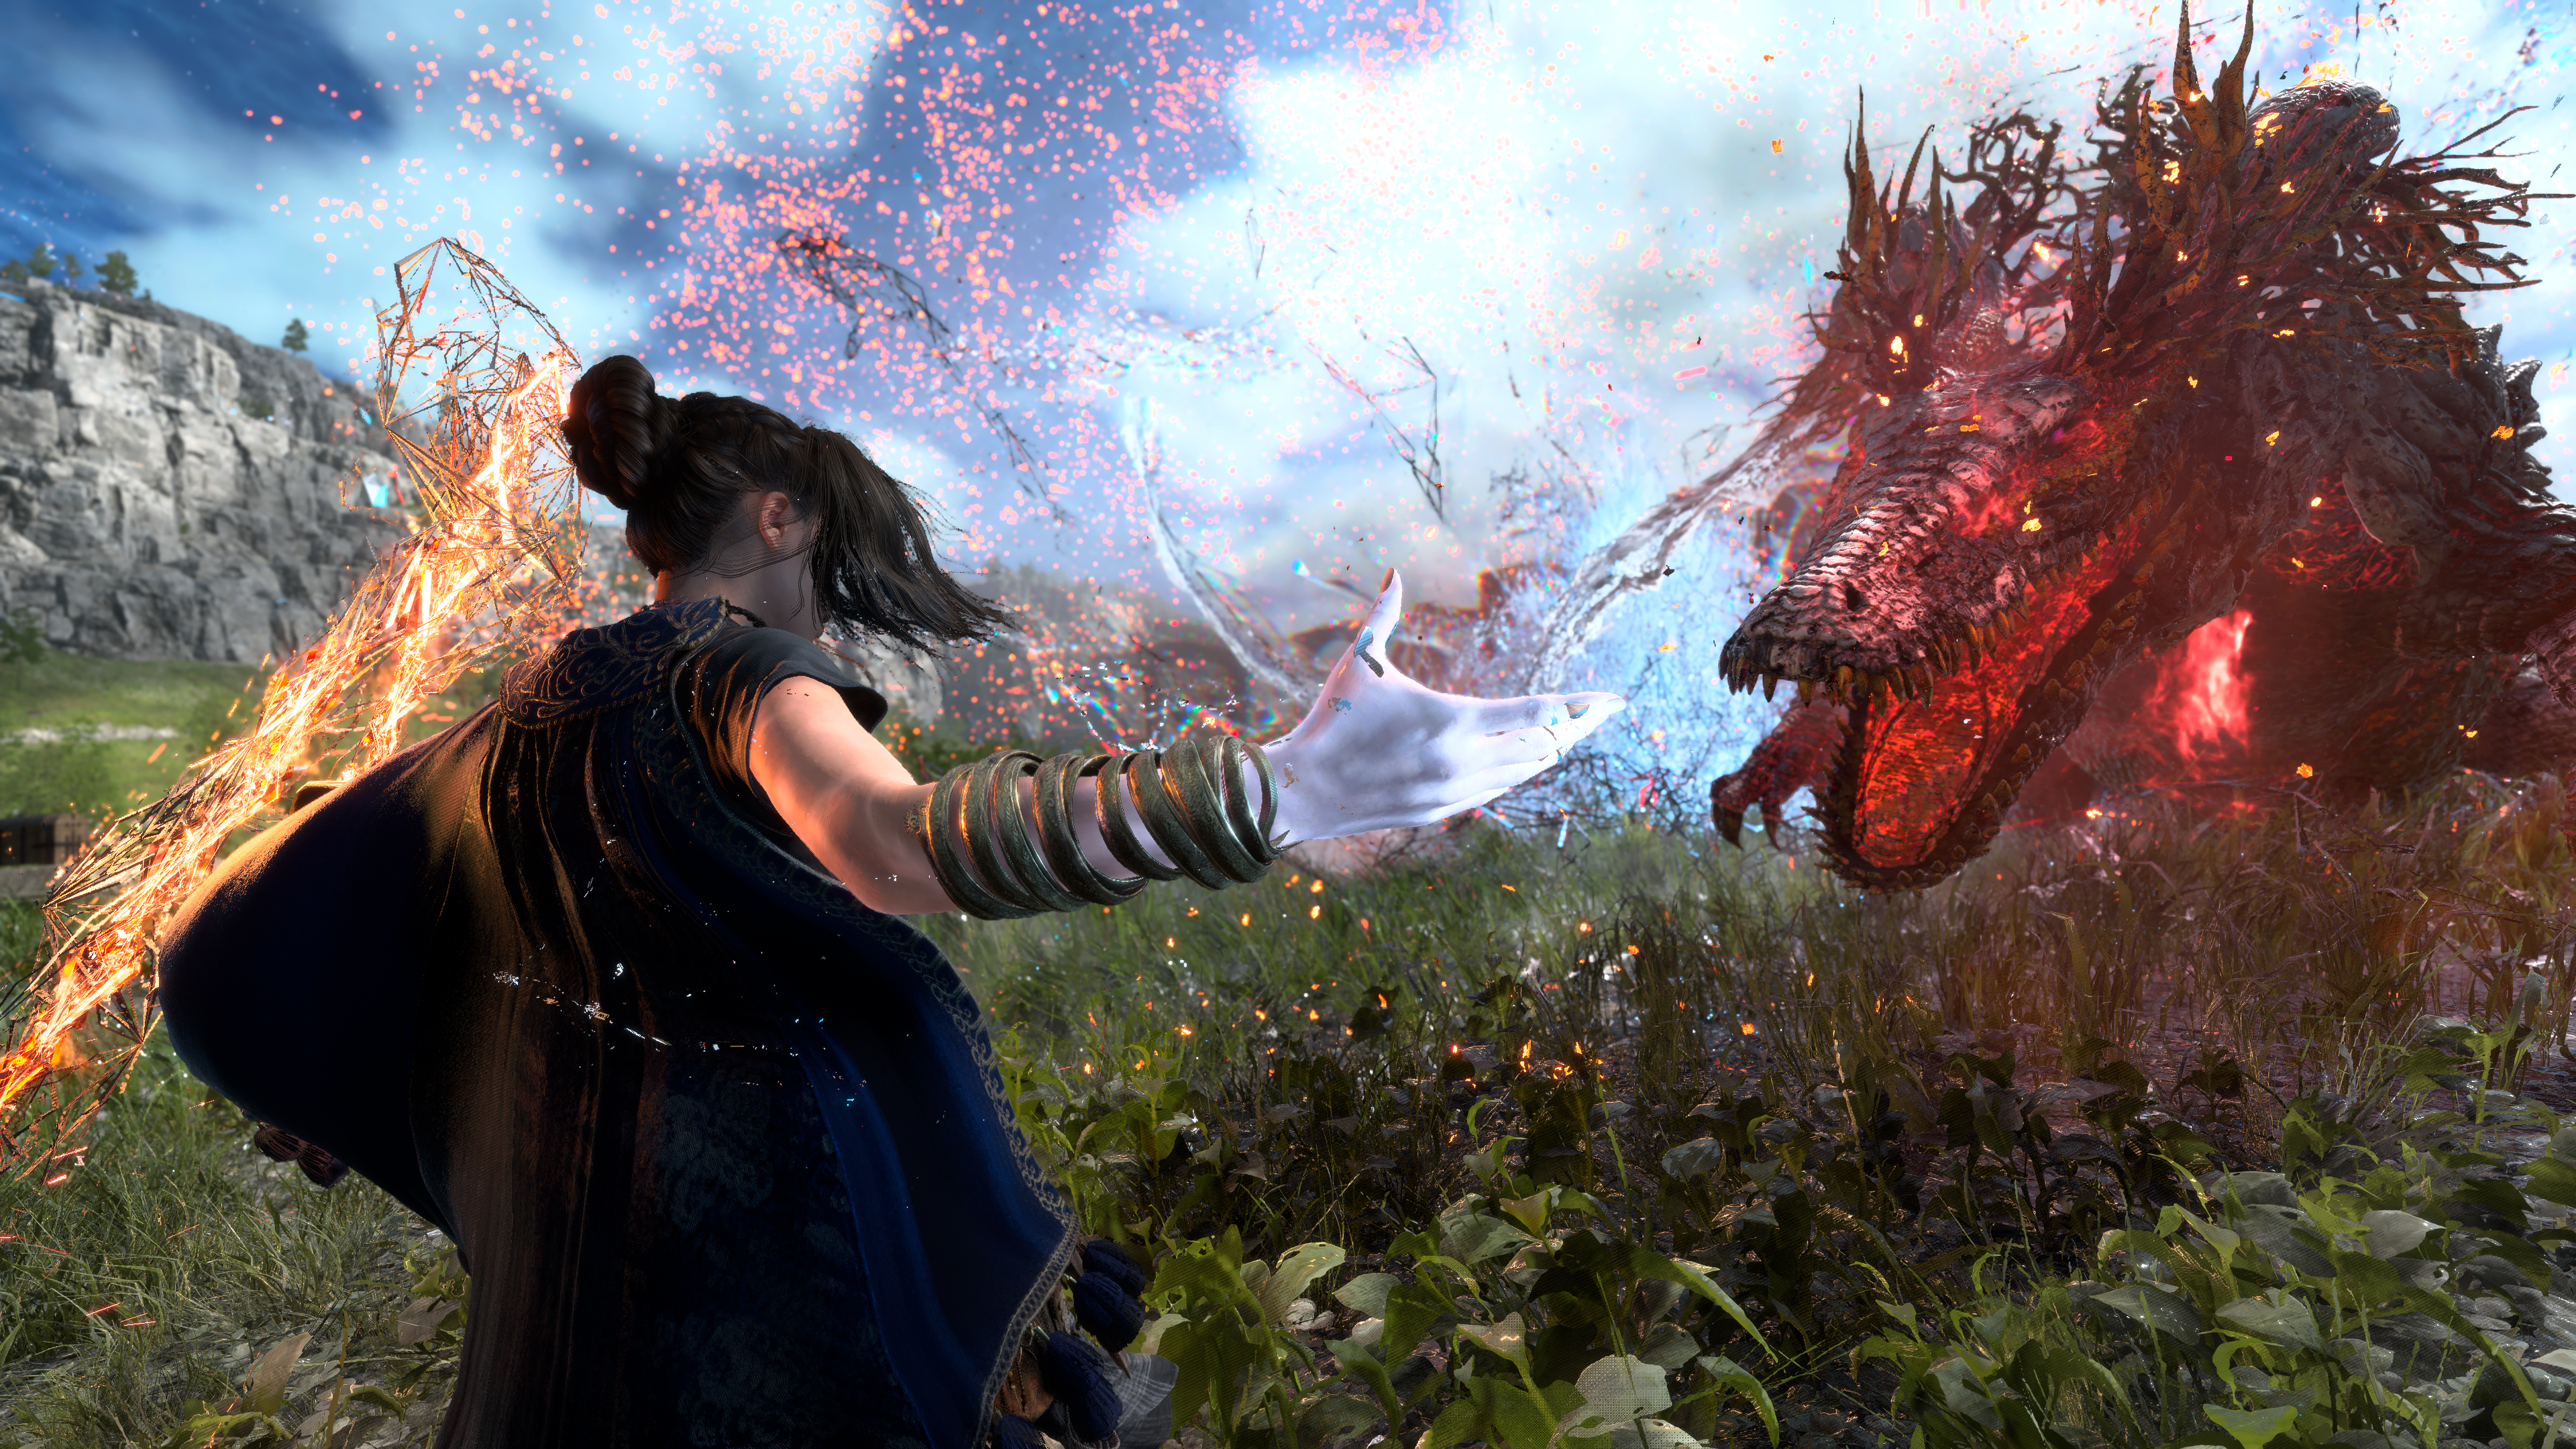 Frey prepares spells to attack a creature in Forspoken.